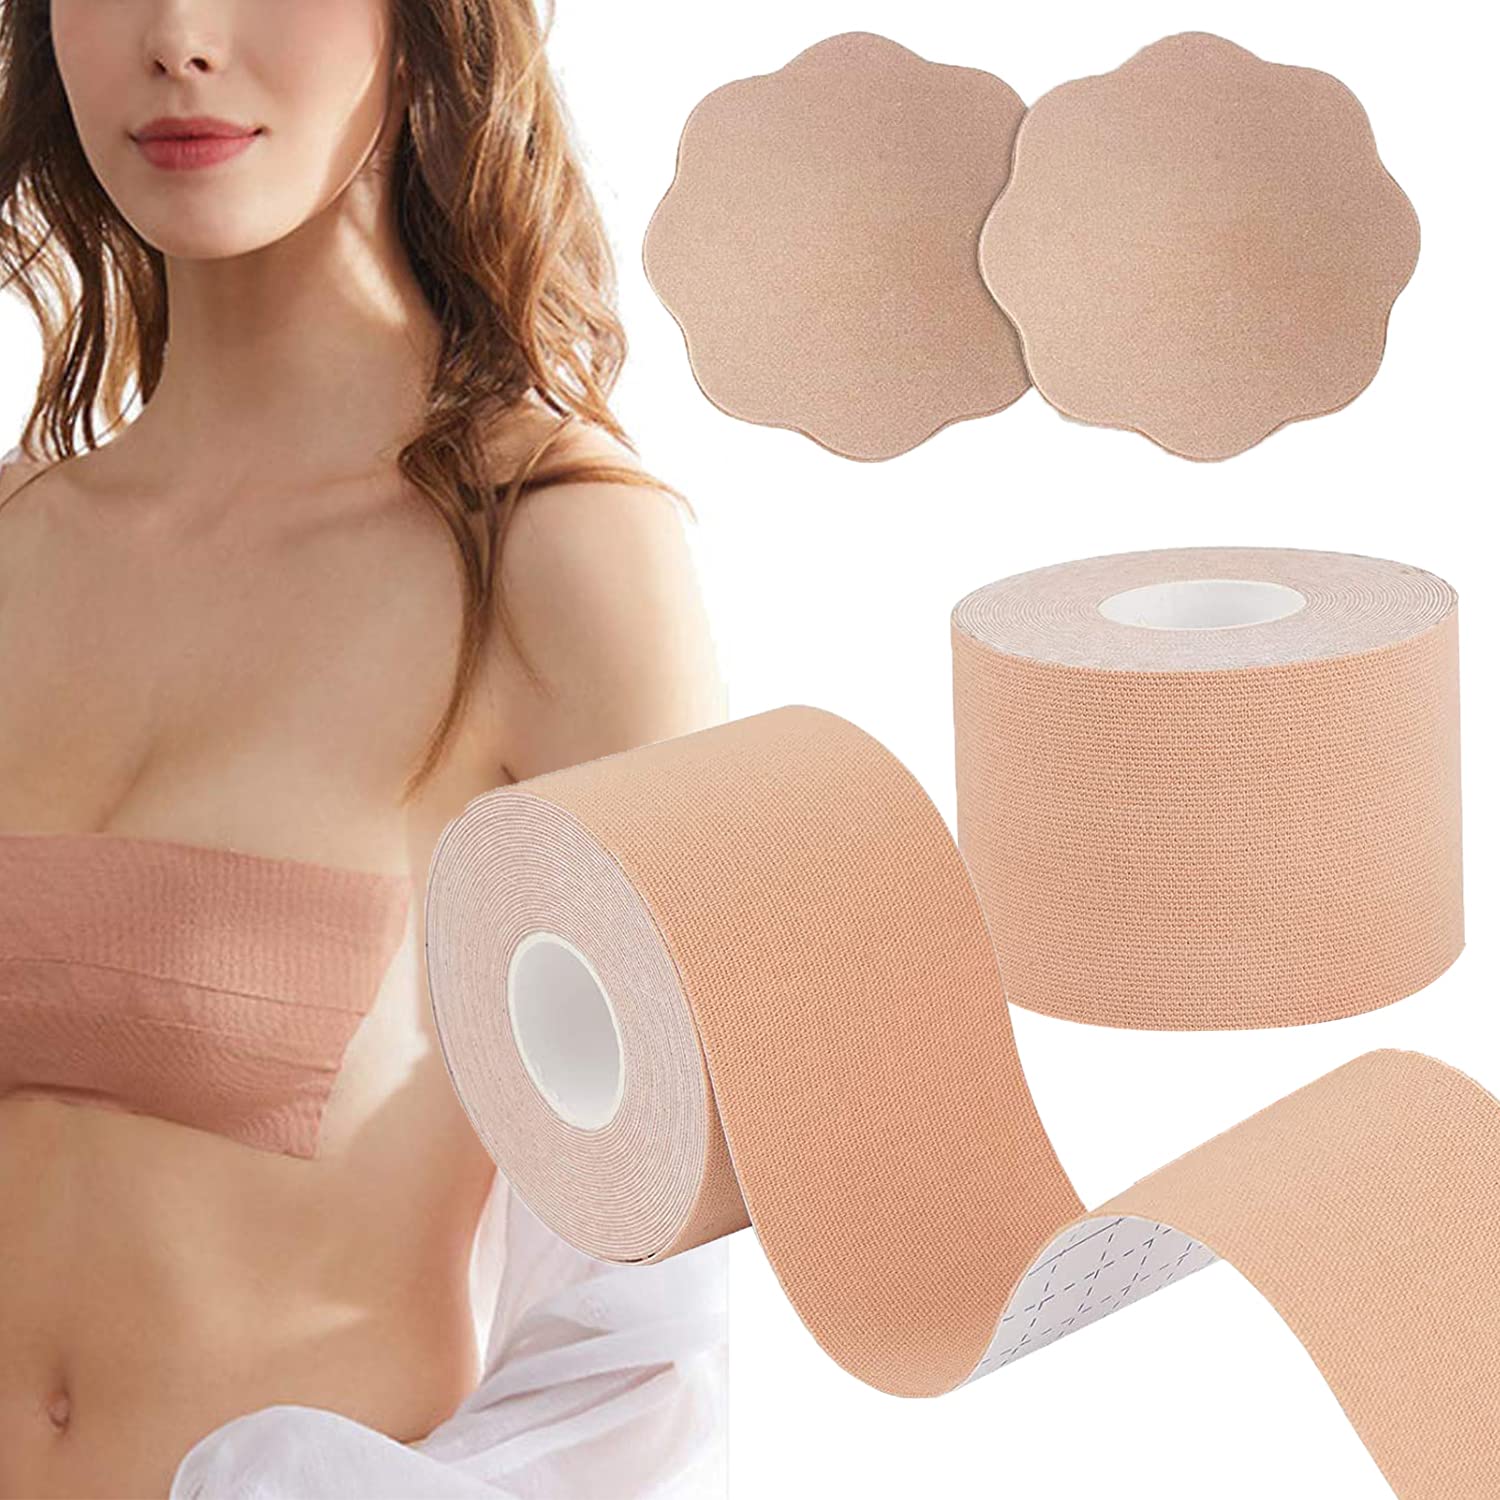 Boob Tape, Breast Lift Tape, BoobyTape for Breast Lift A-E Cup, Self-Adhesive  Bra Tape, Body Tape Chest Support for Any Size Cup, Push Up in All Dress